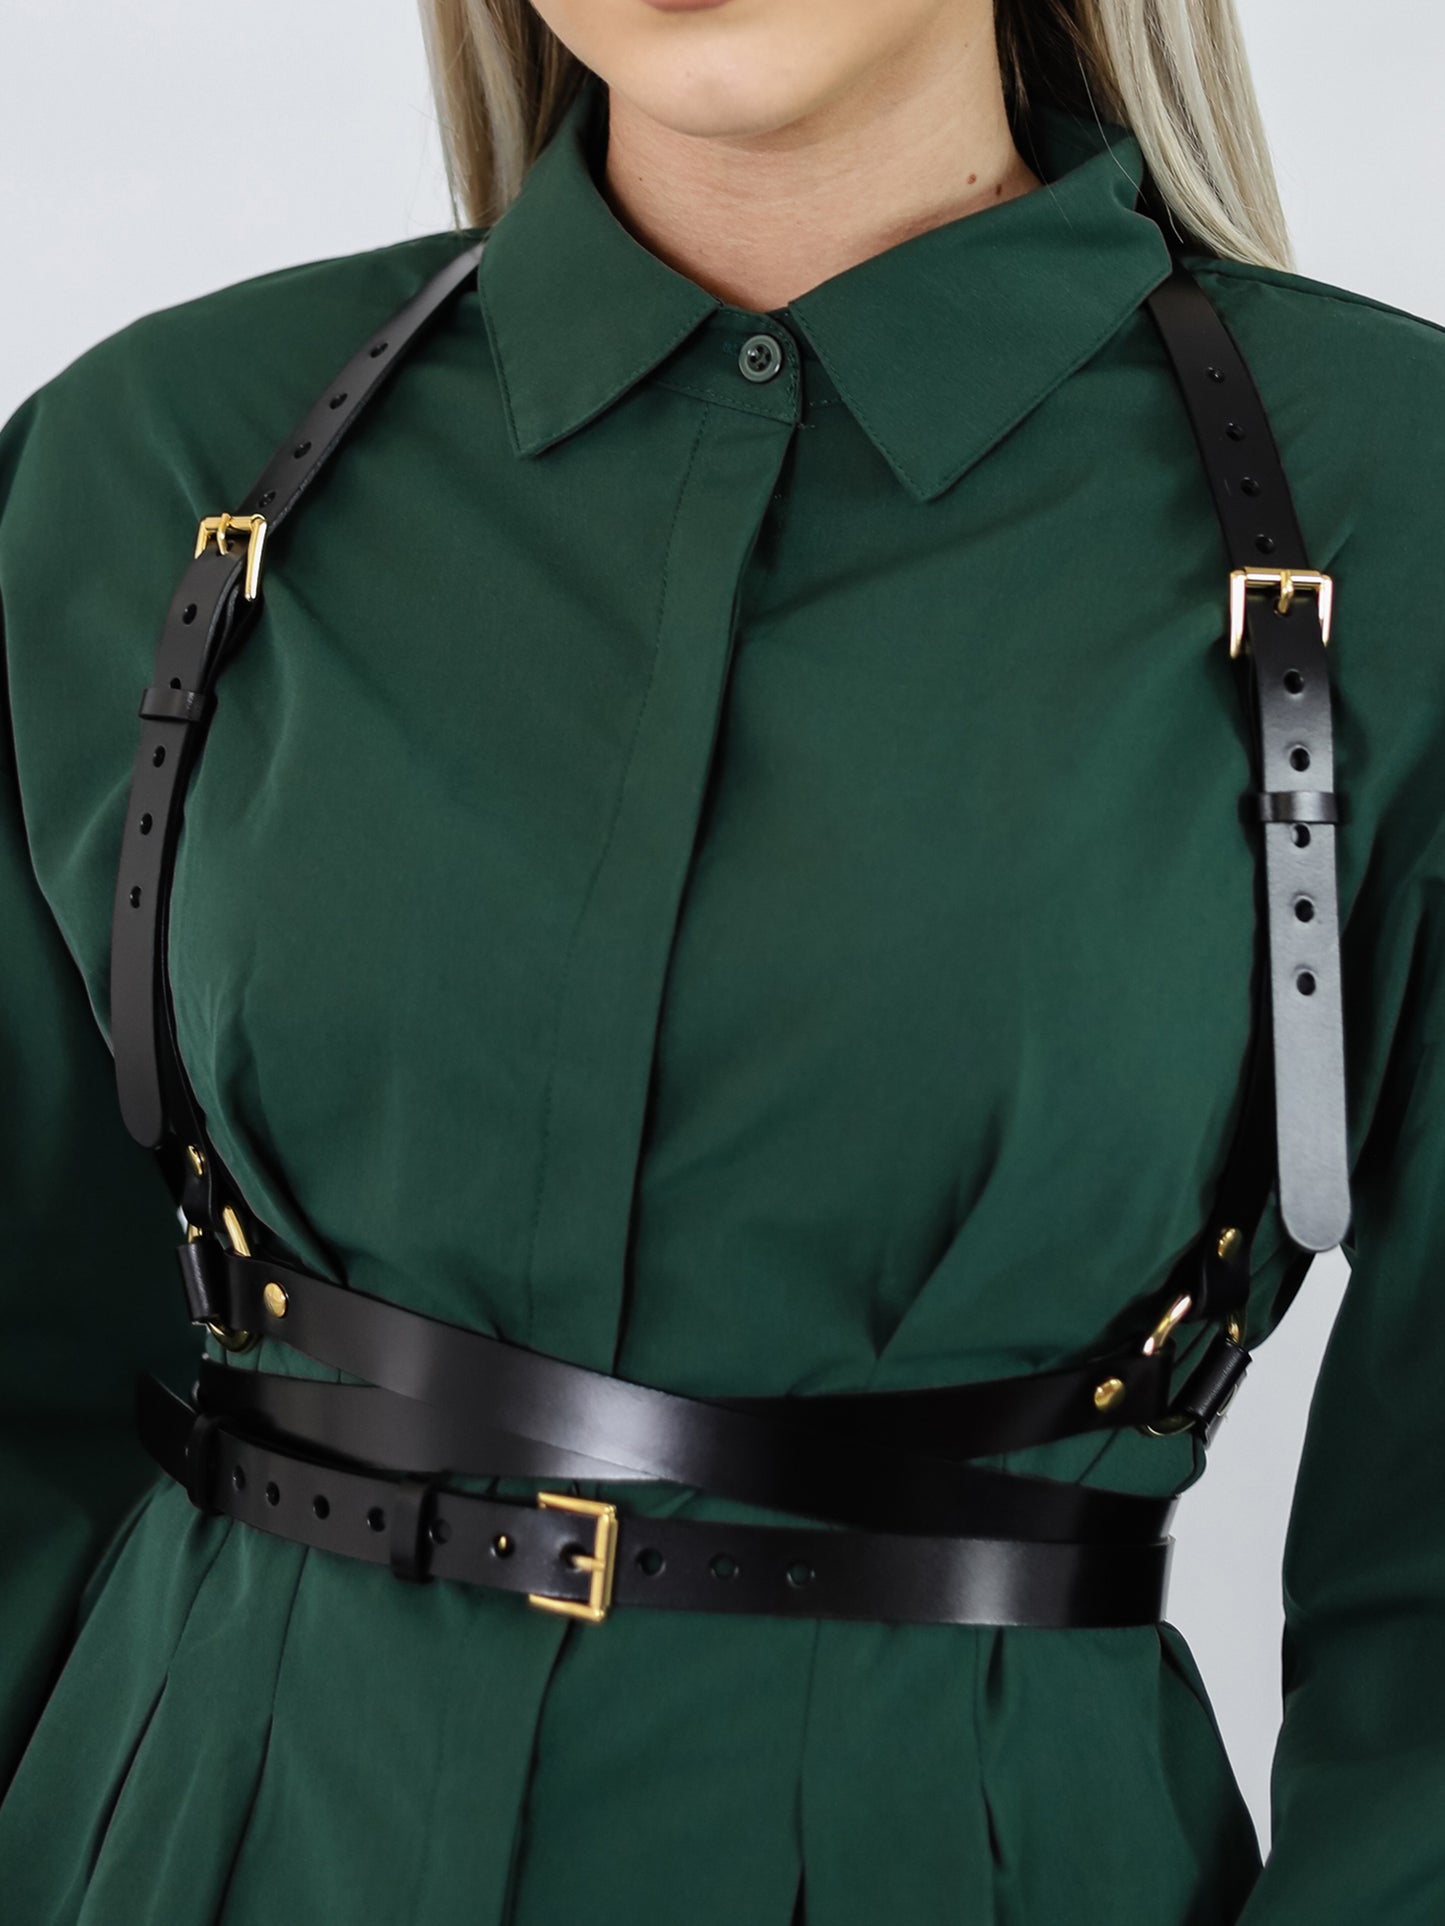 Detailed view of double belt harness.